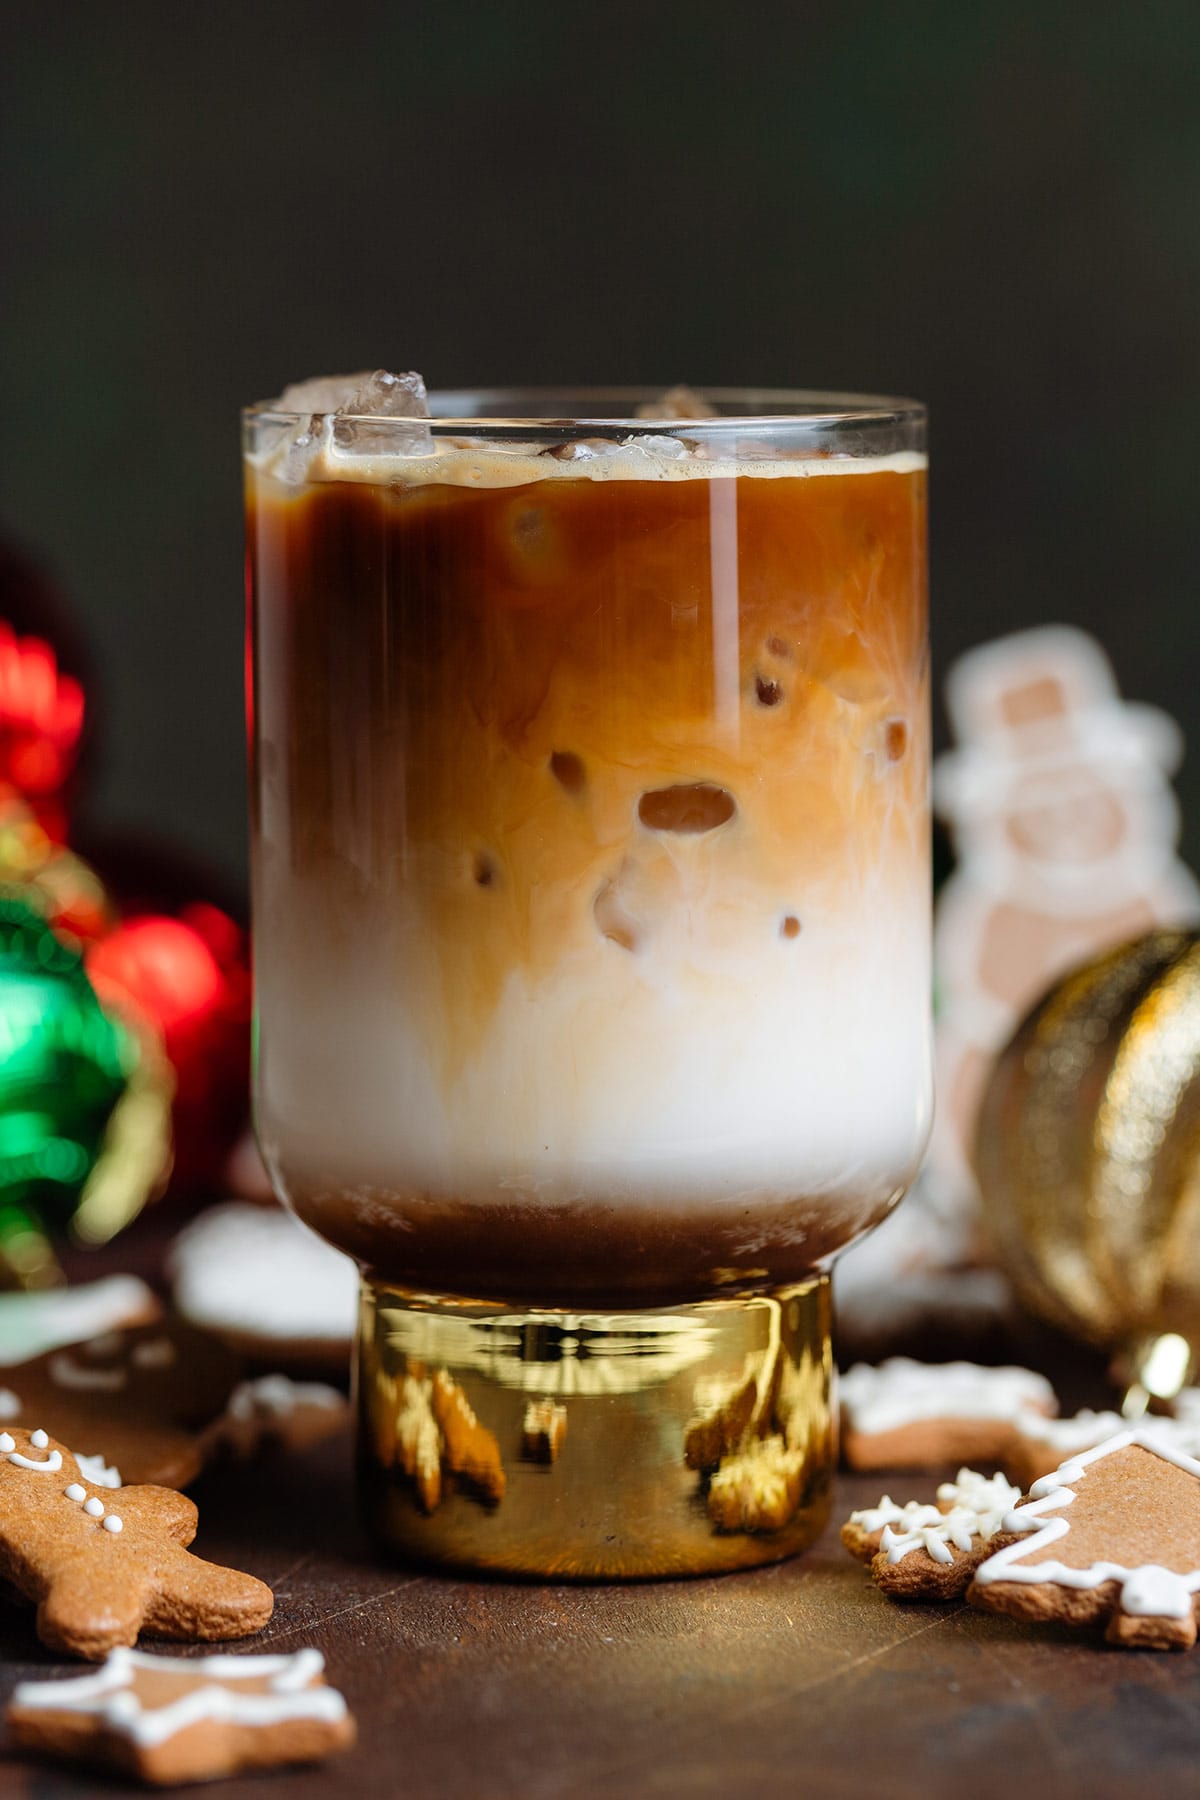 An iced latte with in a tall glass with a gold bottom, with three layers of syrup, milk, and espresso on top.